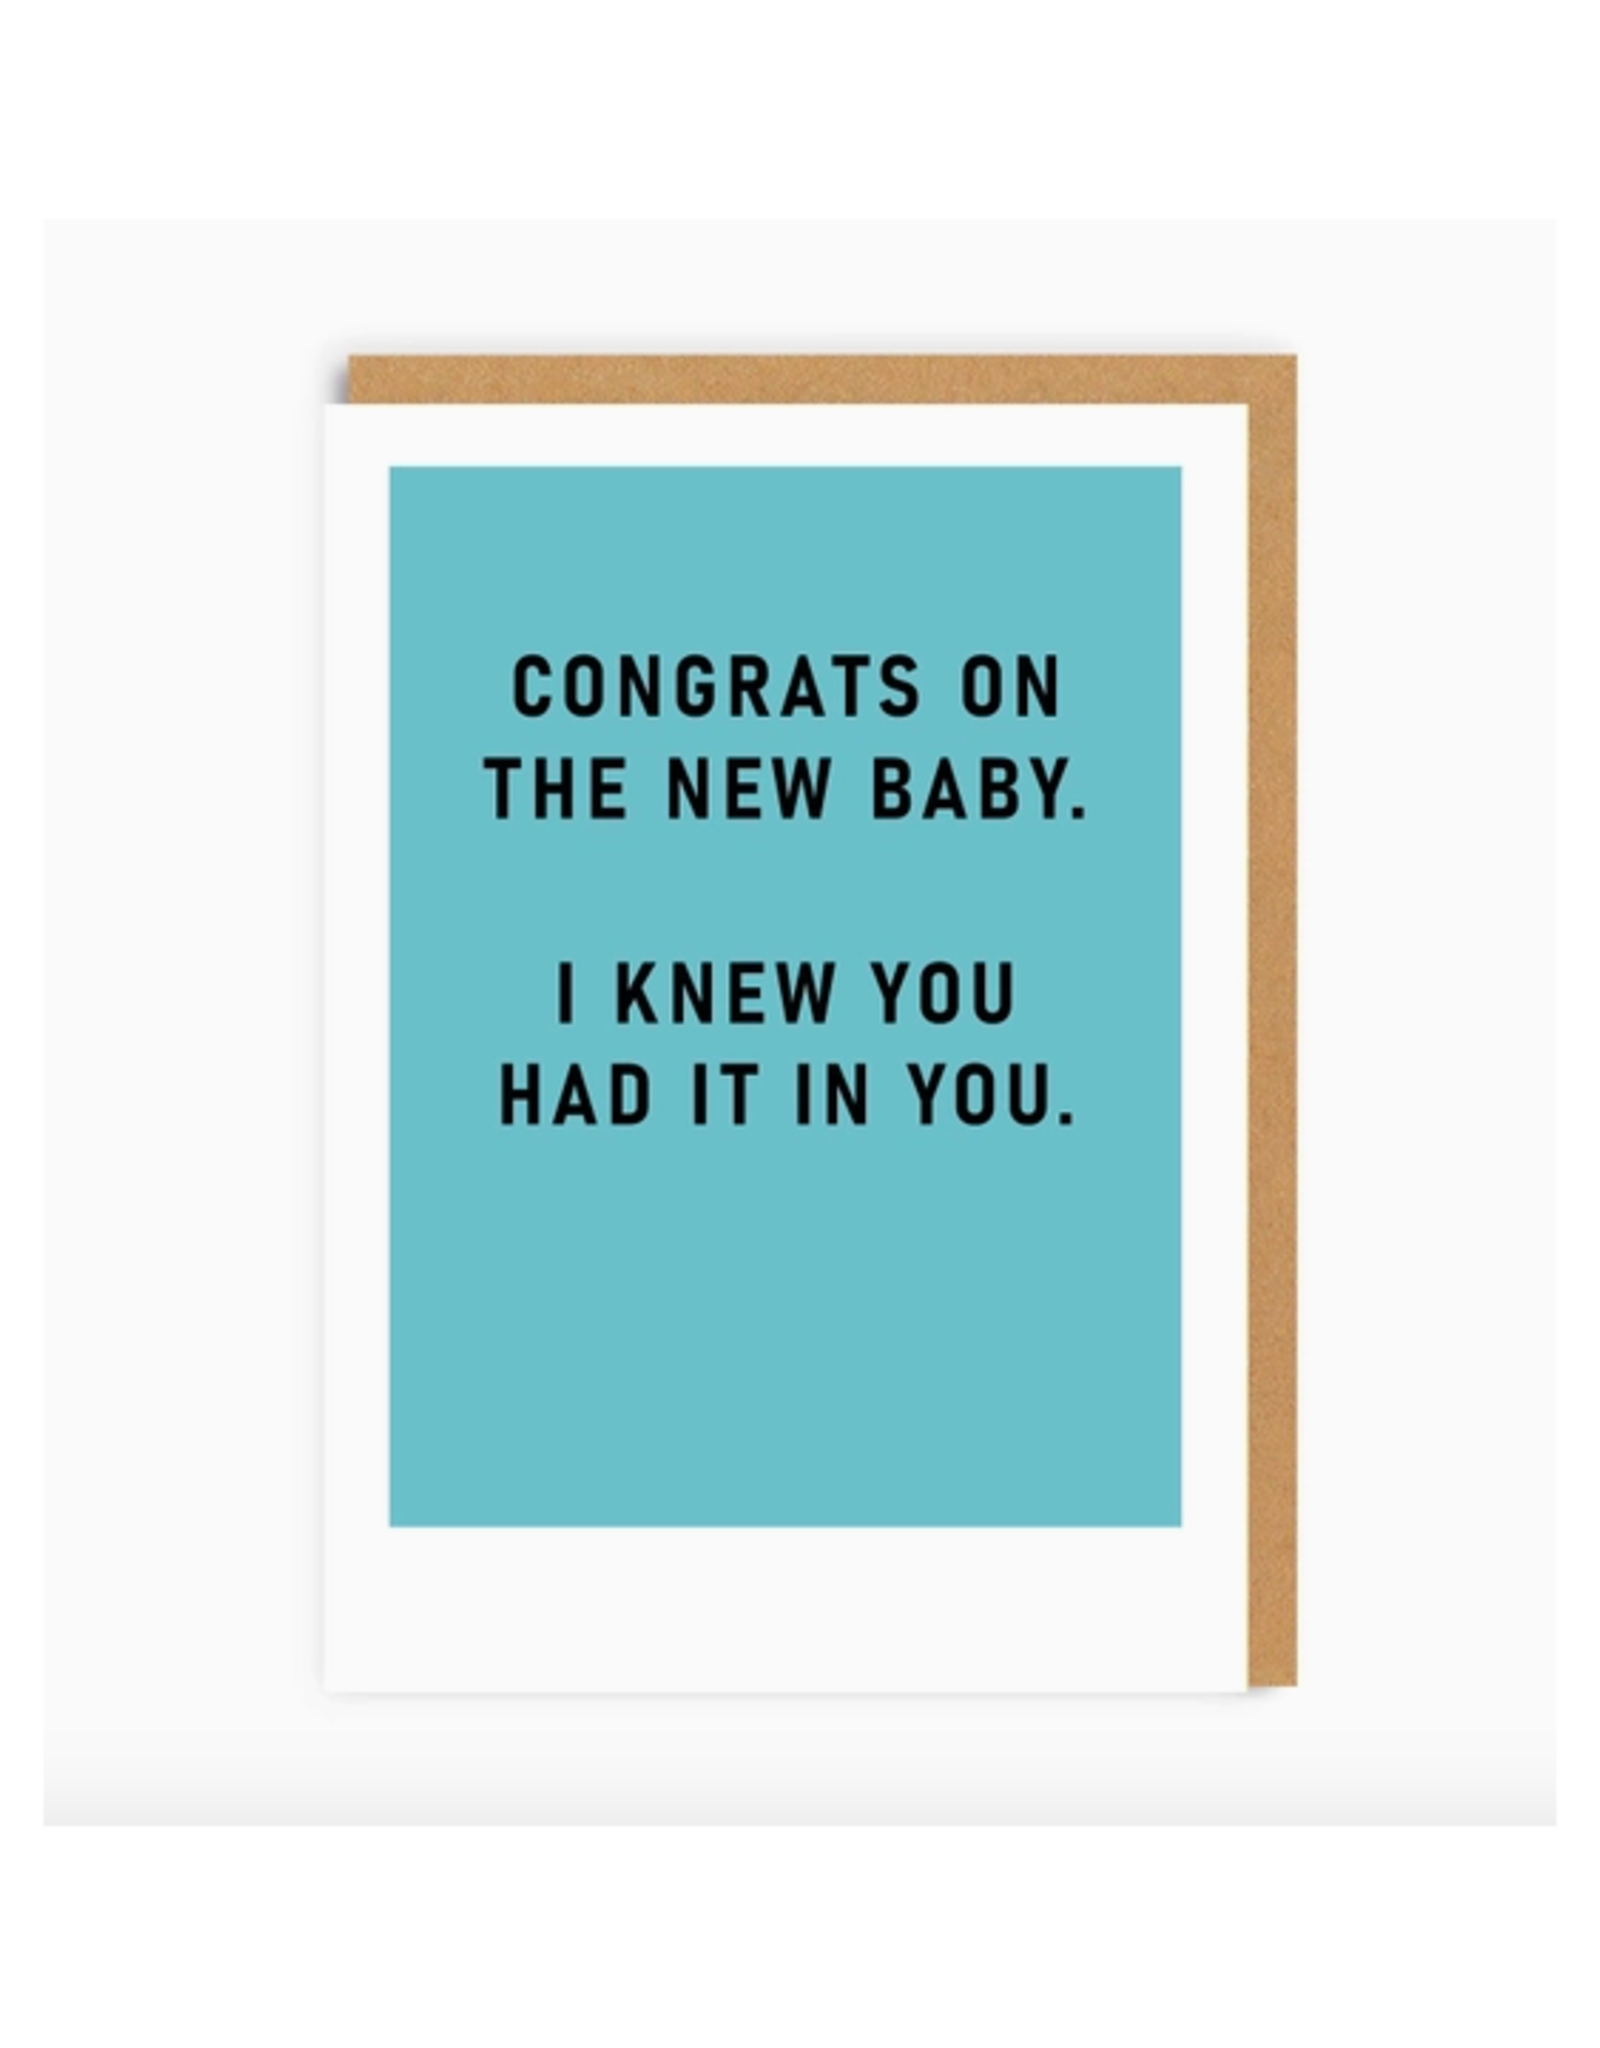 I Knew You Had It in You (New Baby) Greeting Card